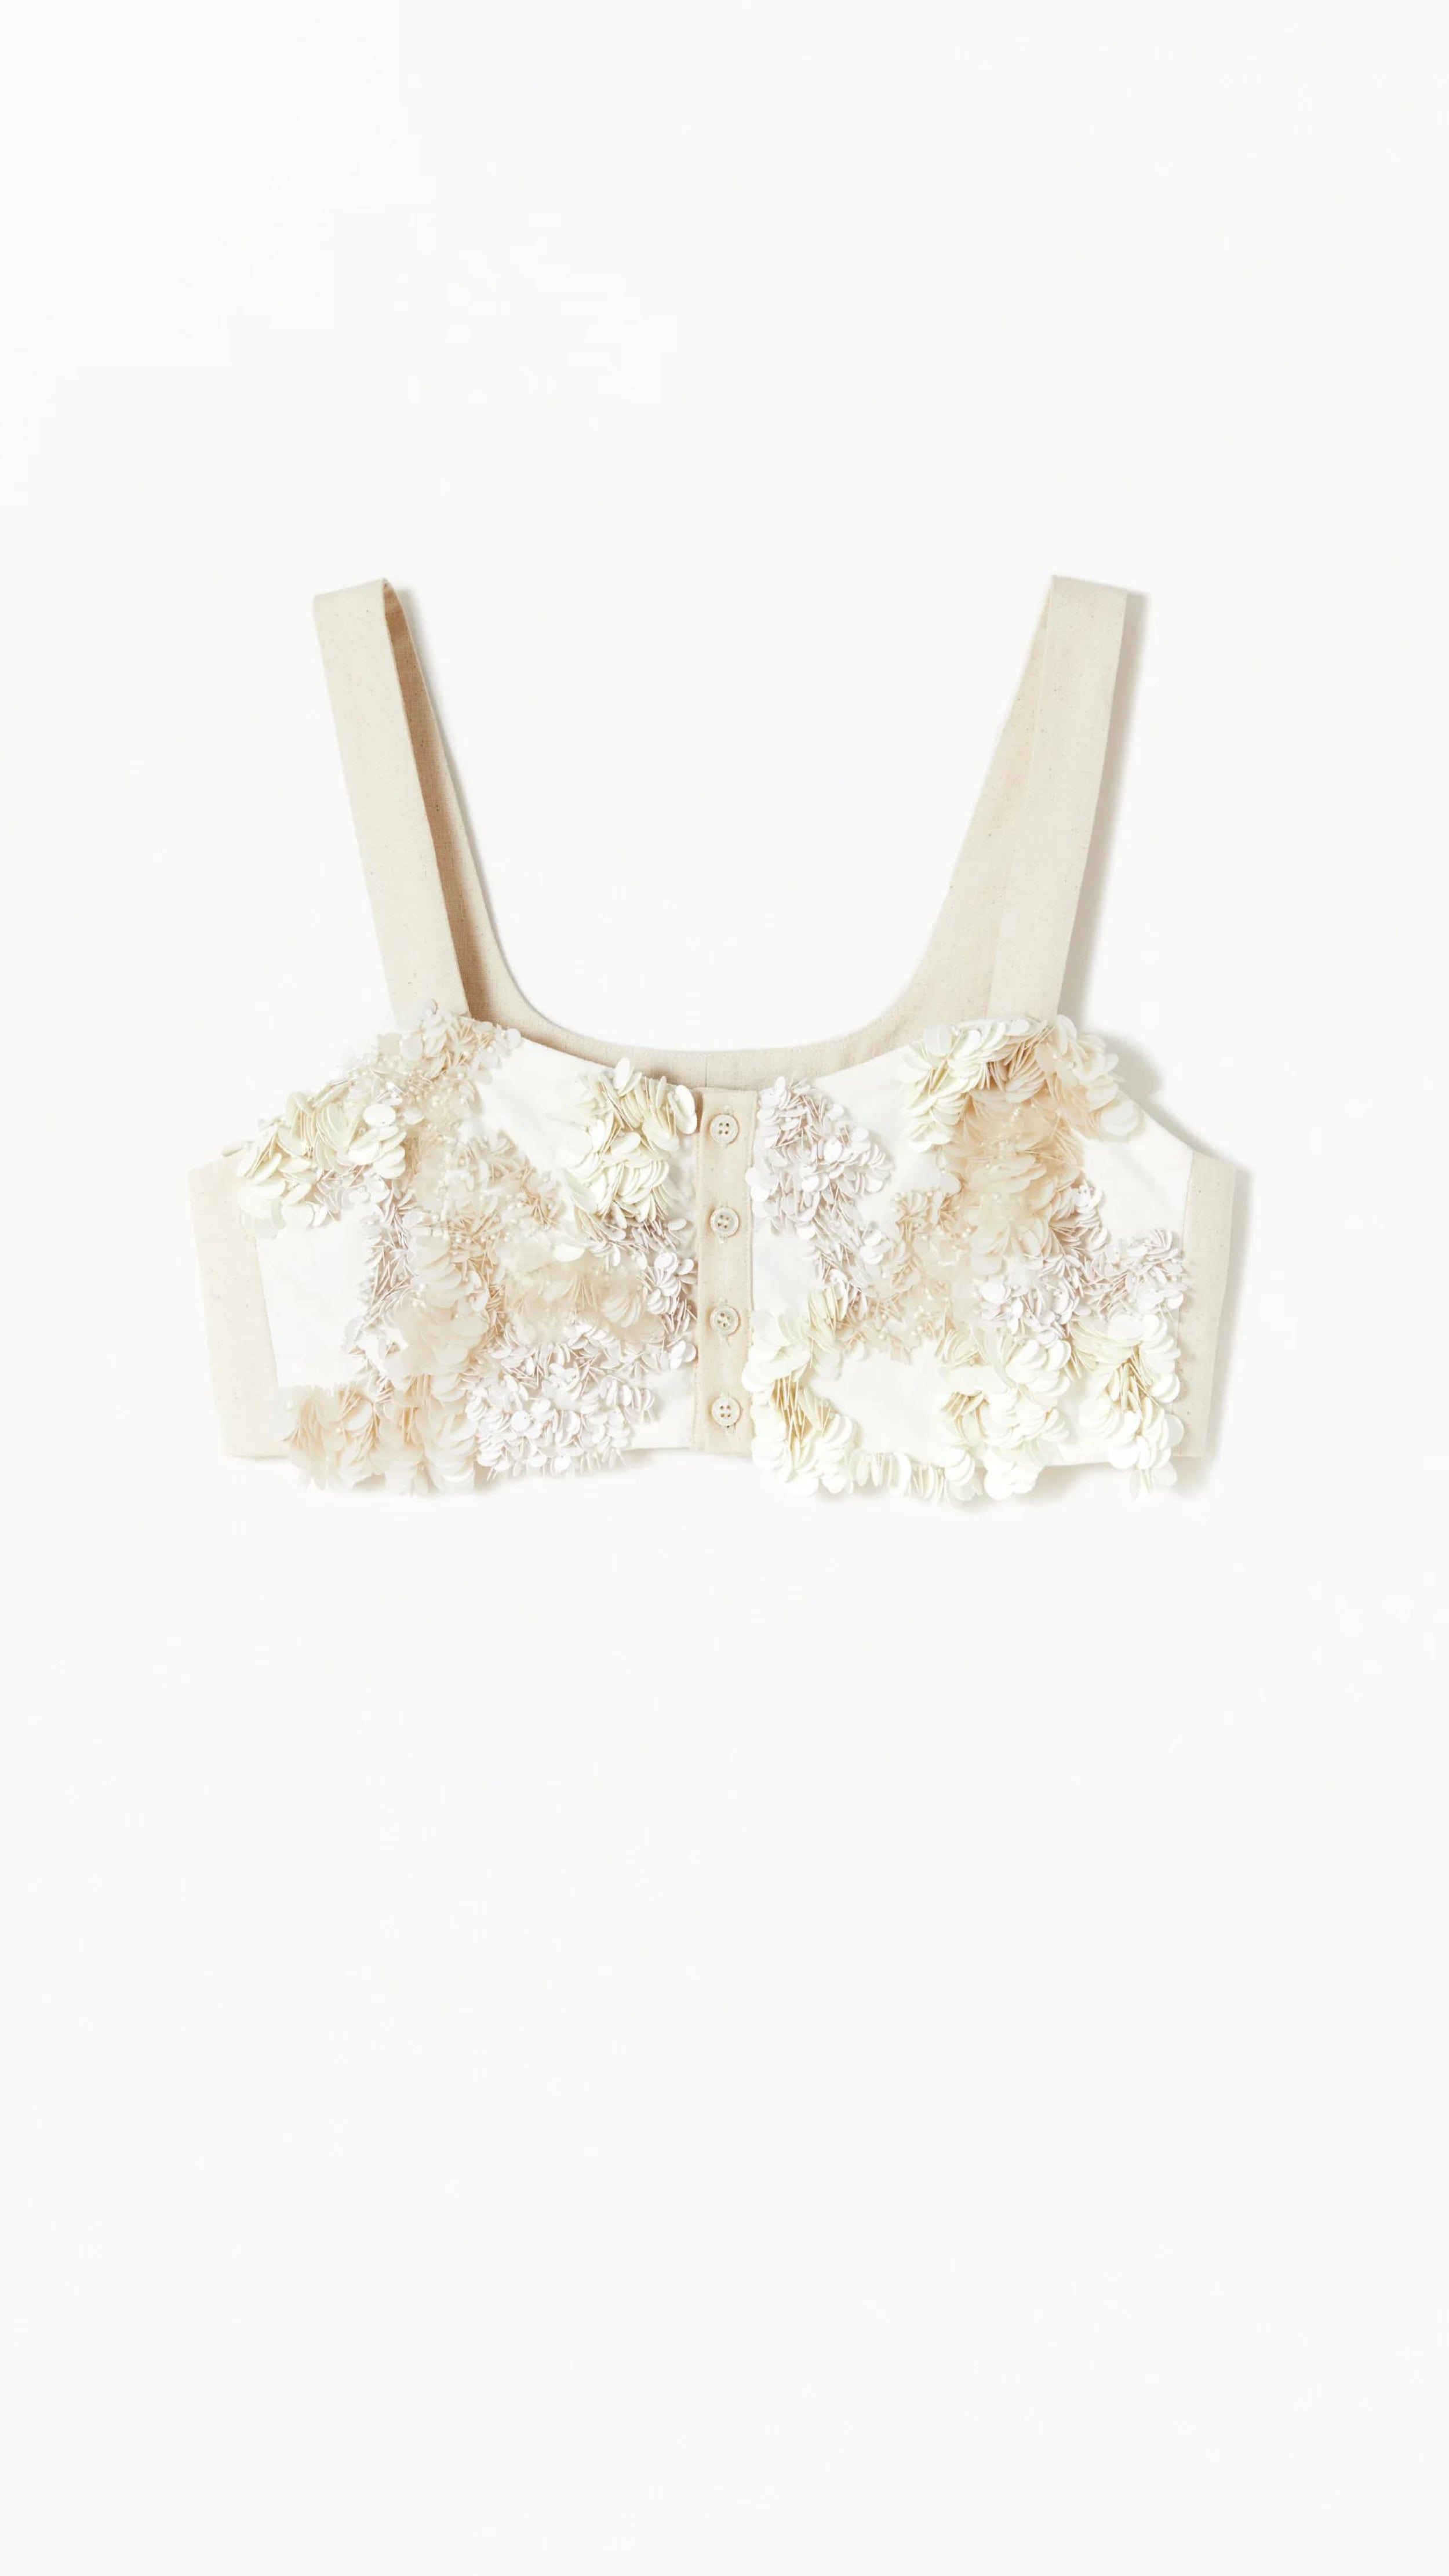 Plan C, Cream Sequinned Corset Top. Bra style layering piece. Soft panama cotton adorned with sequins, a sweetheart neckline and front button closure. Product photo shown from the front.